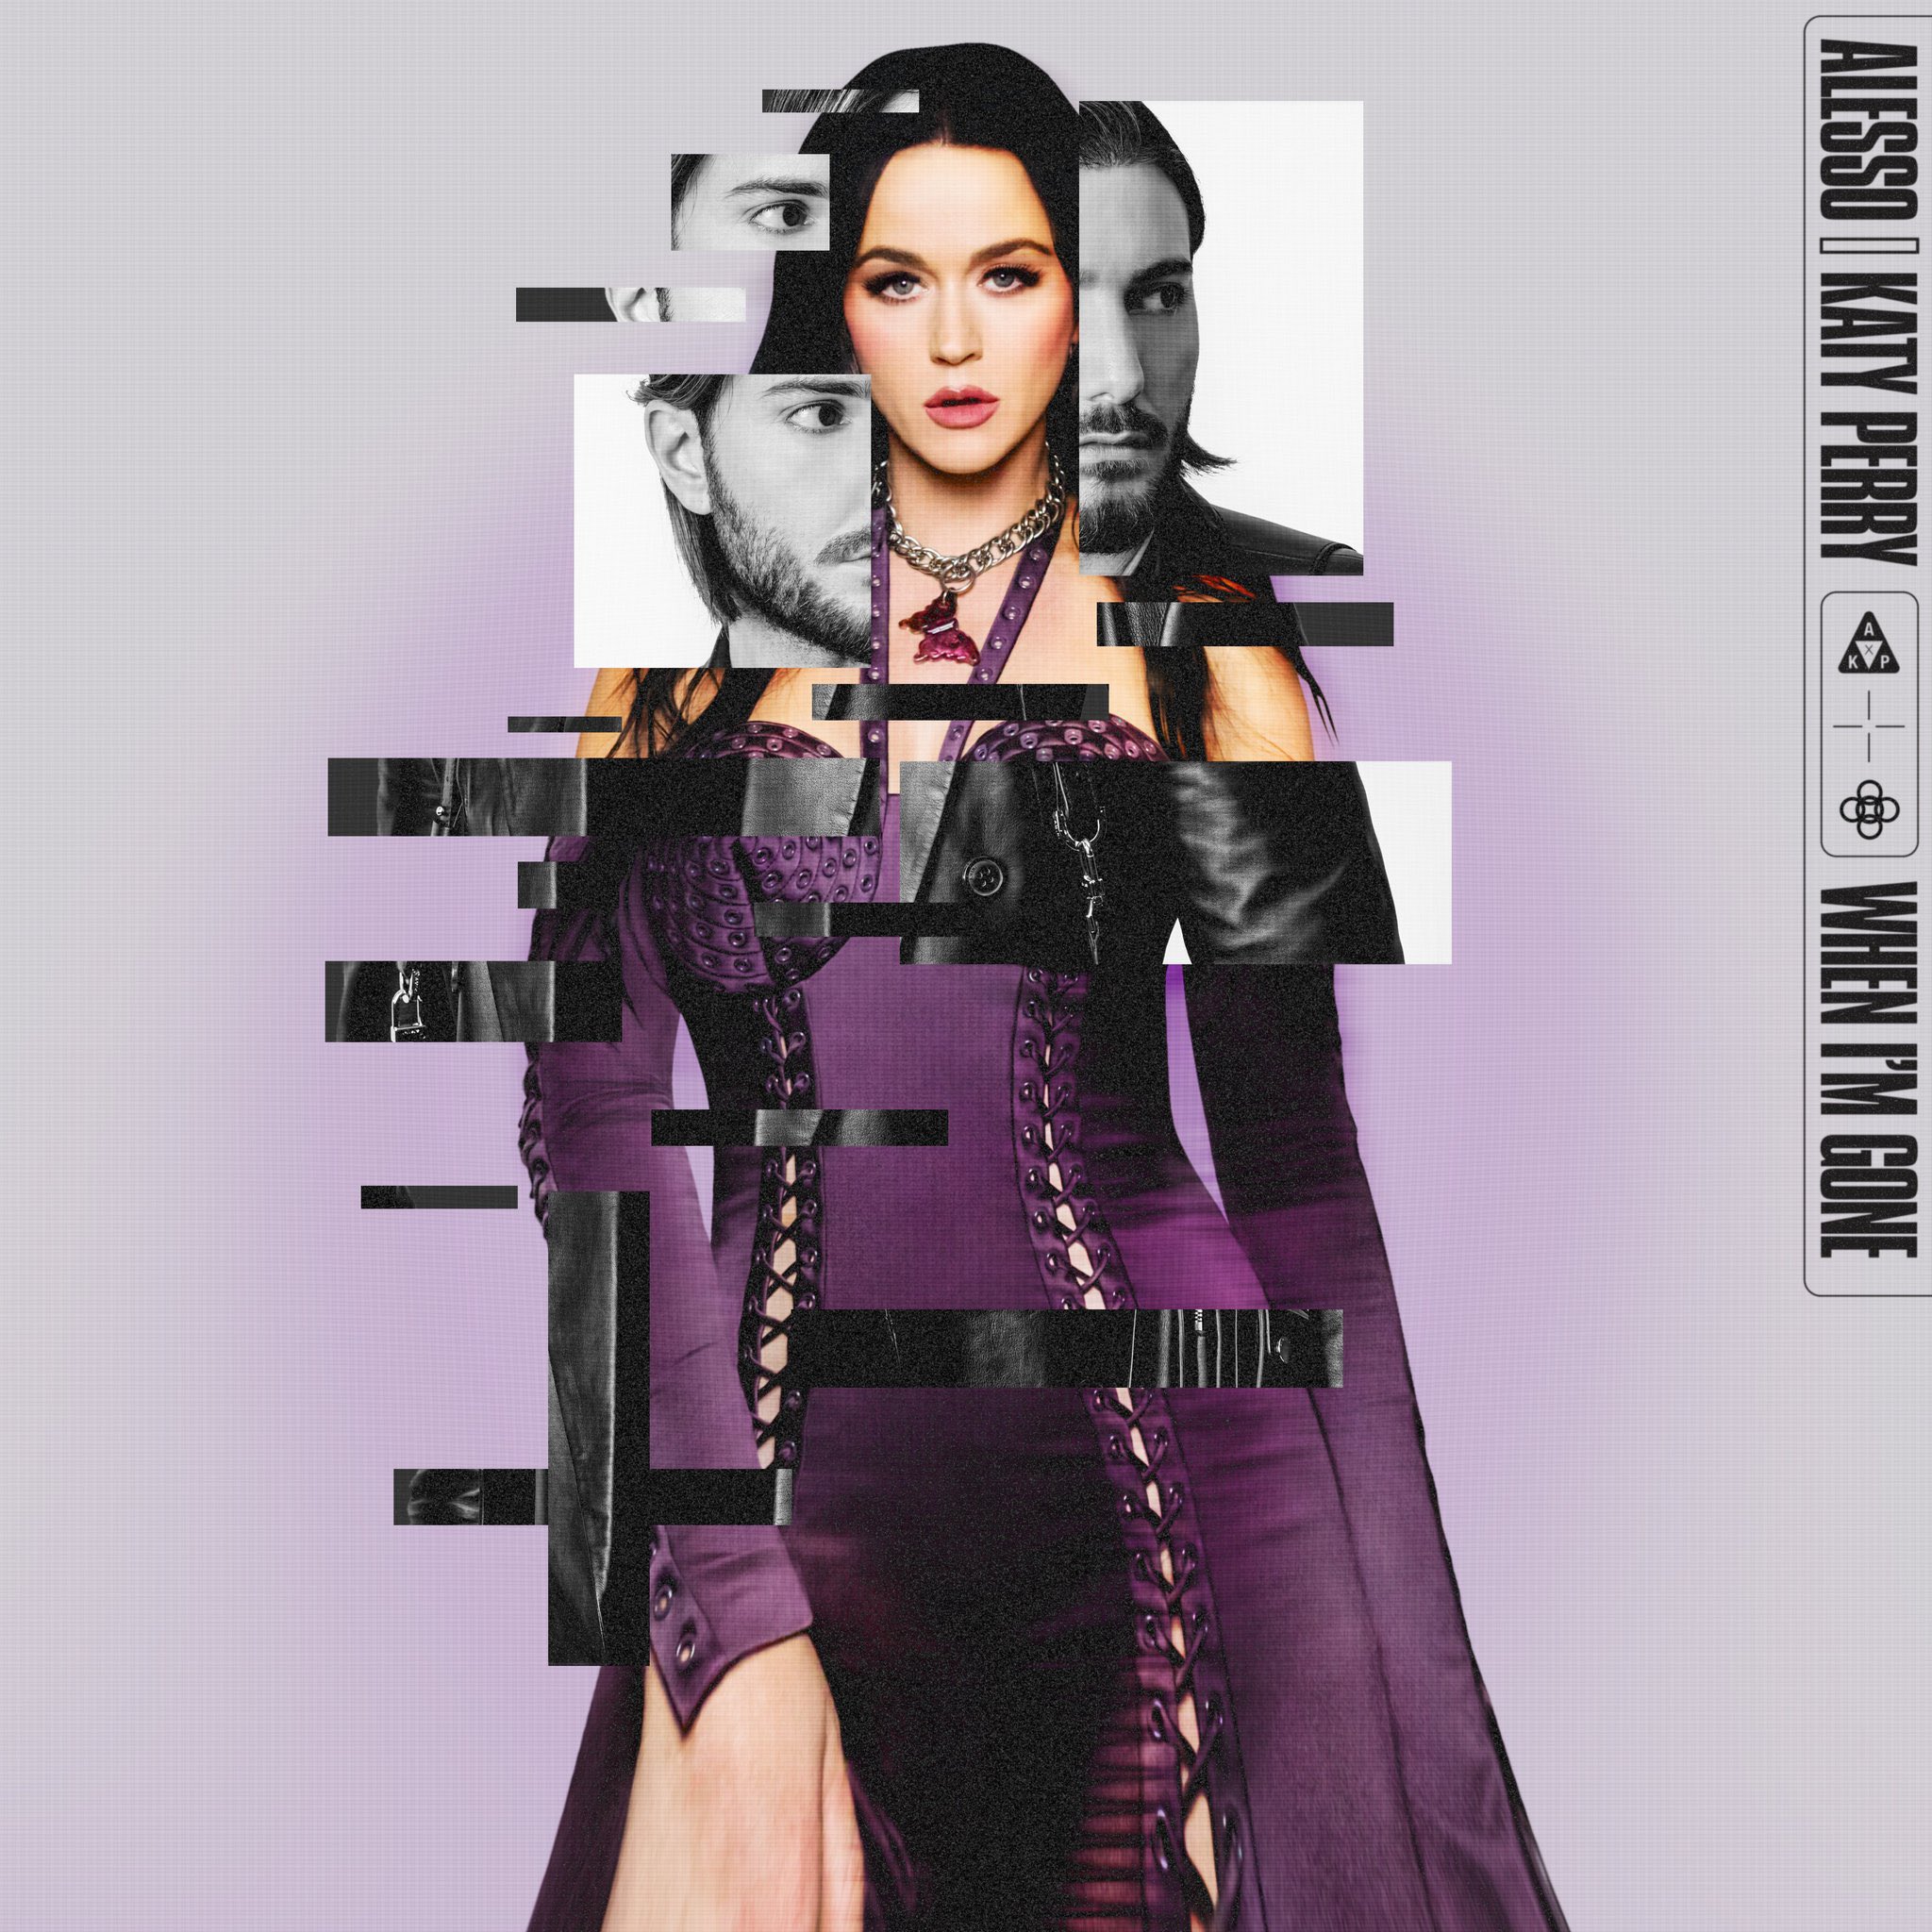 Katy Perry >> single "When I'm Gone (feat. Alesso) FGqfMP2XwAYHjf9?format=jpg&name=large